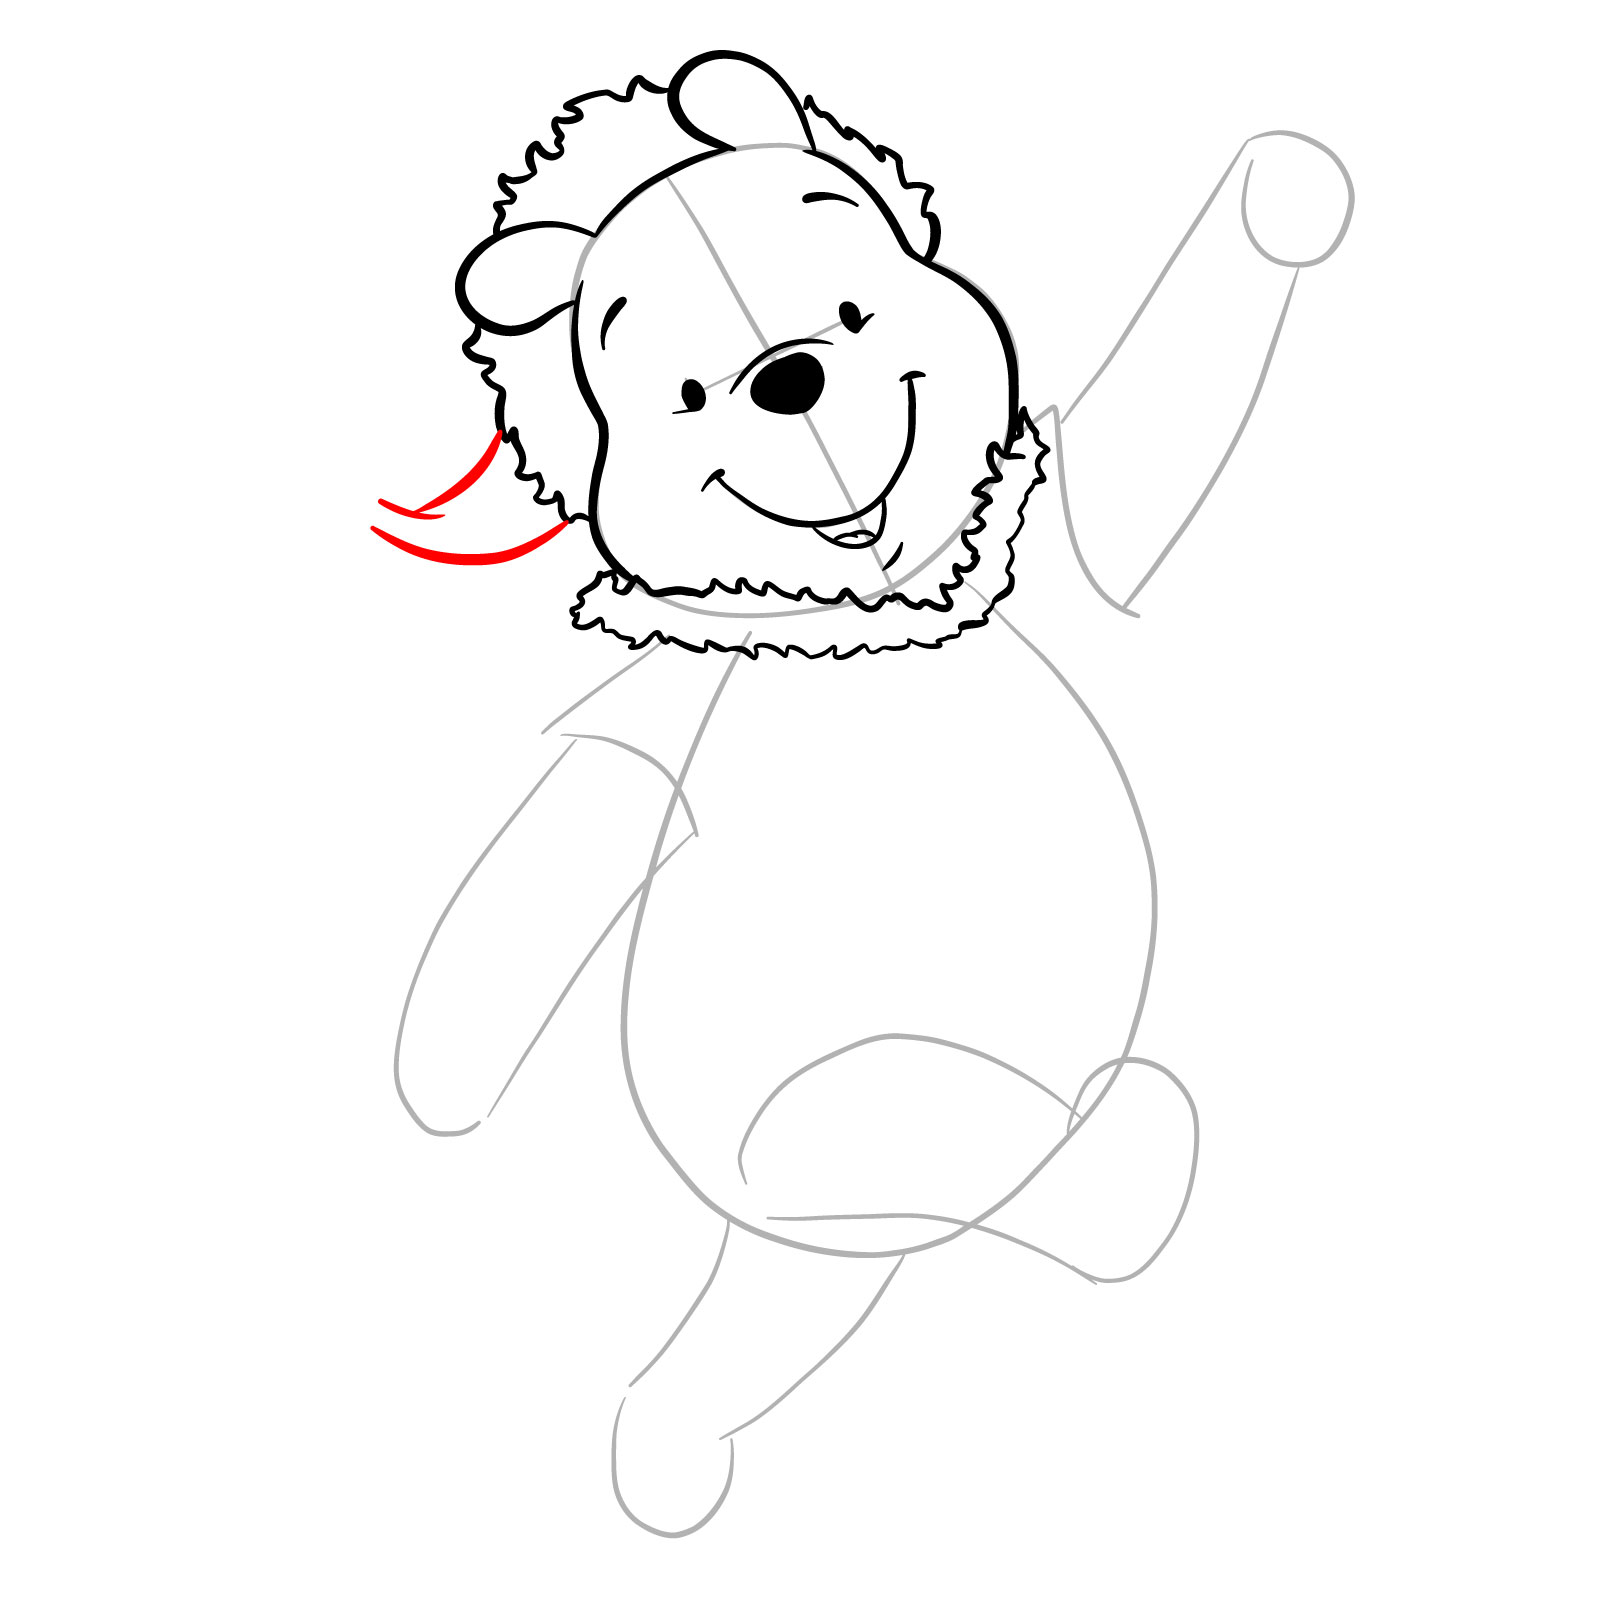 How to draw Winnie-the-Pooh Christmas style - step 13